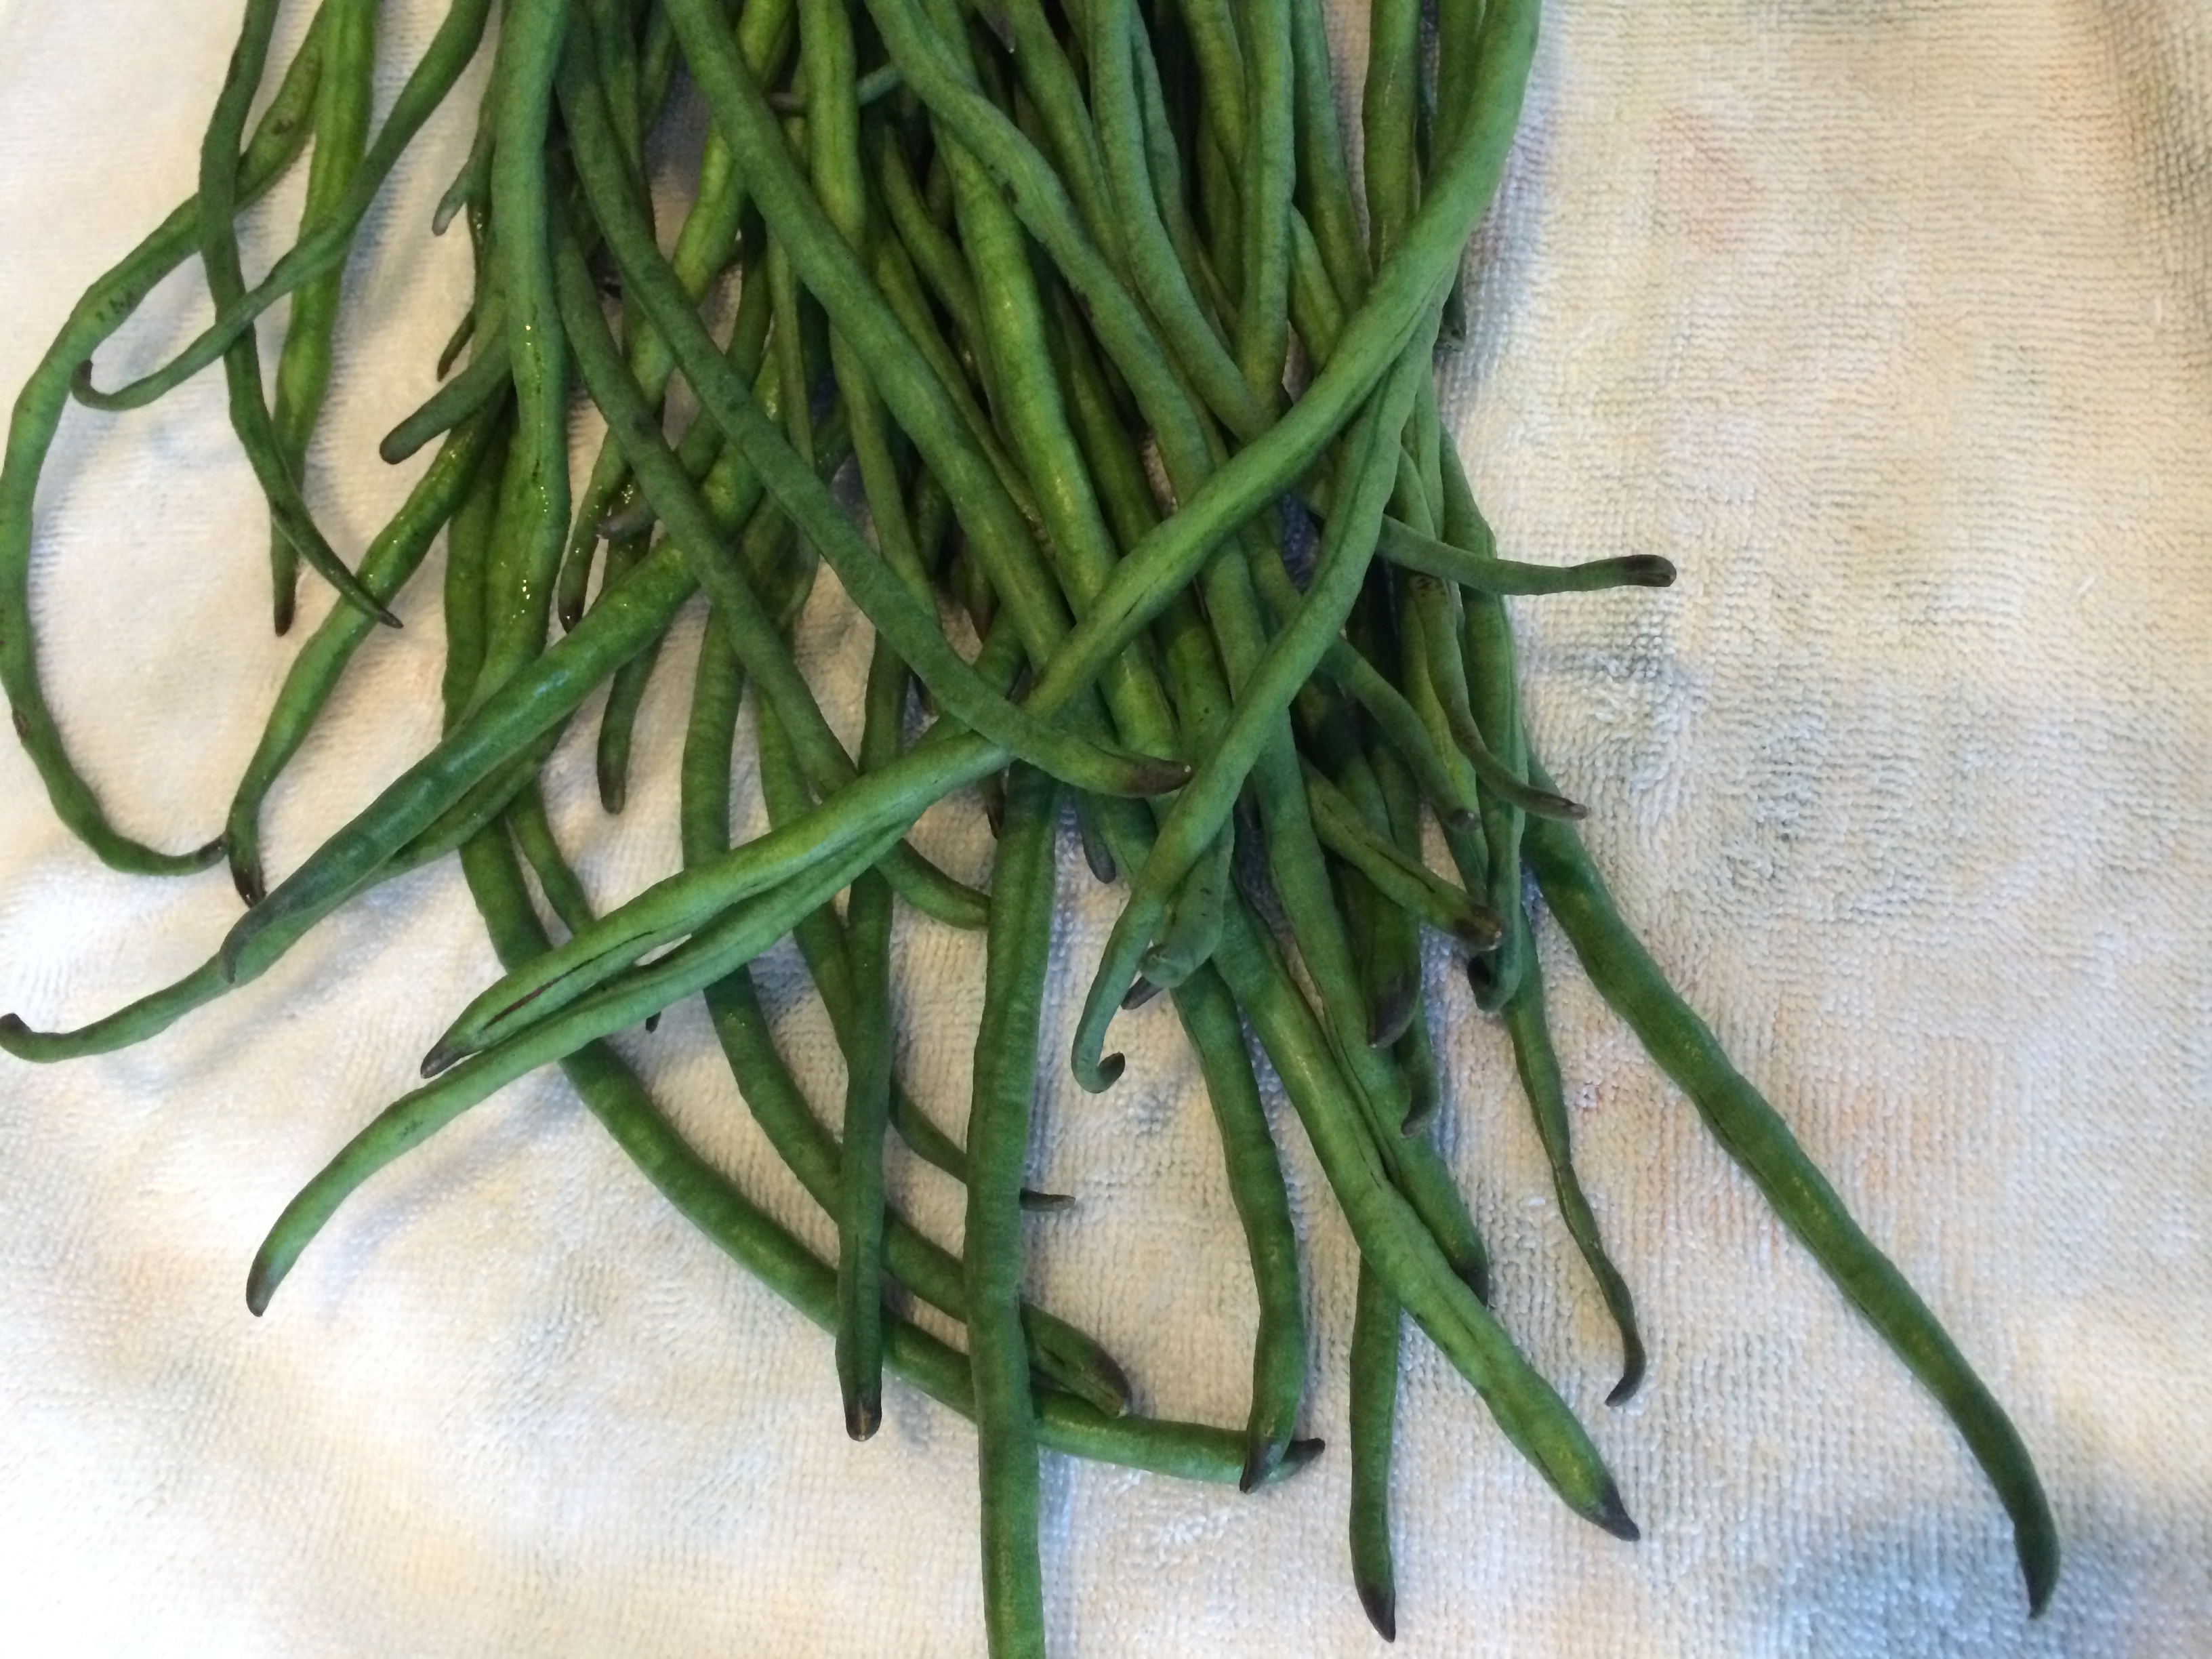 Long green beans, washed